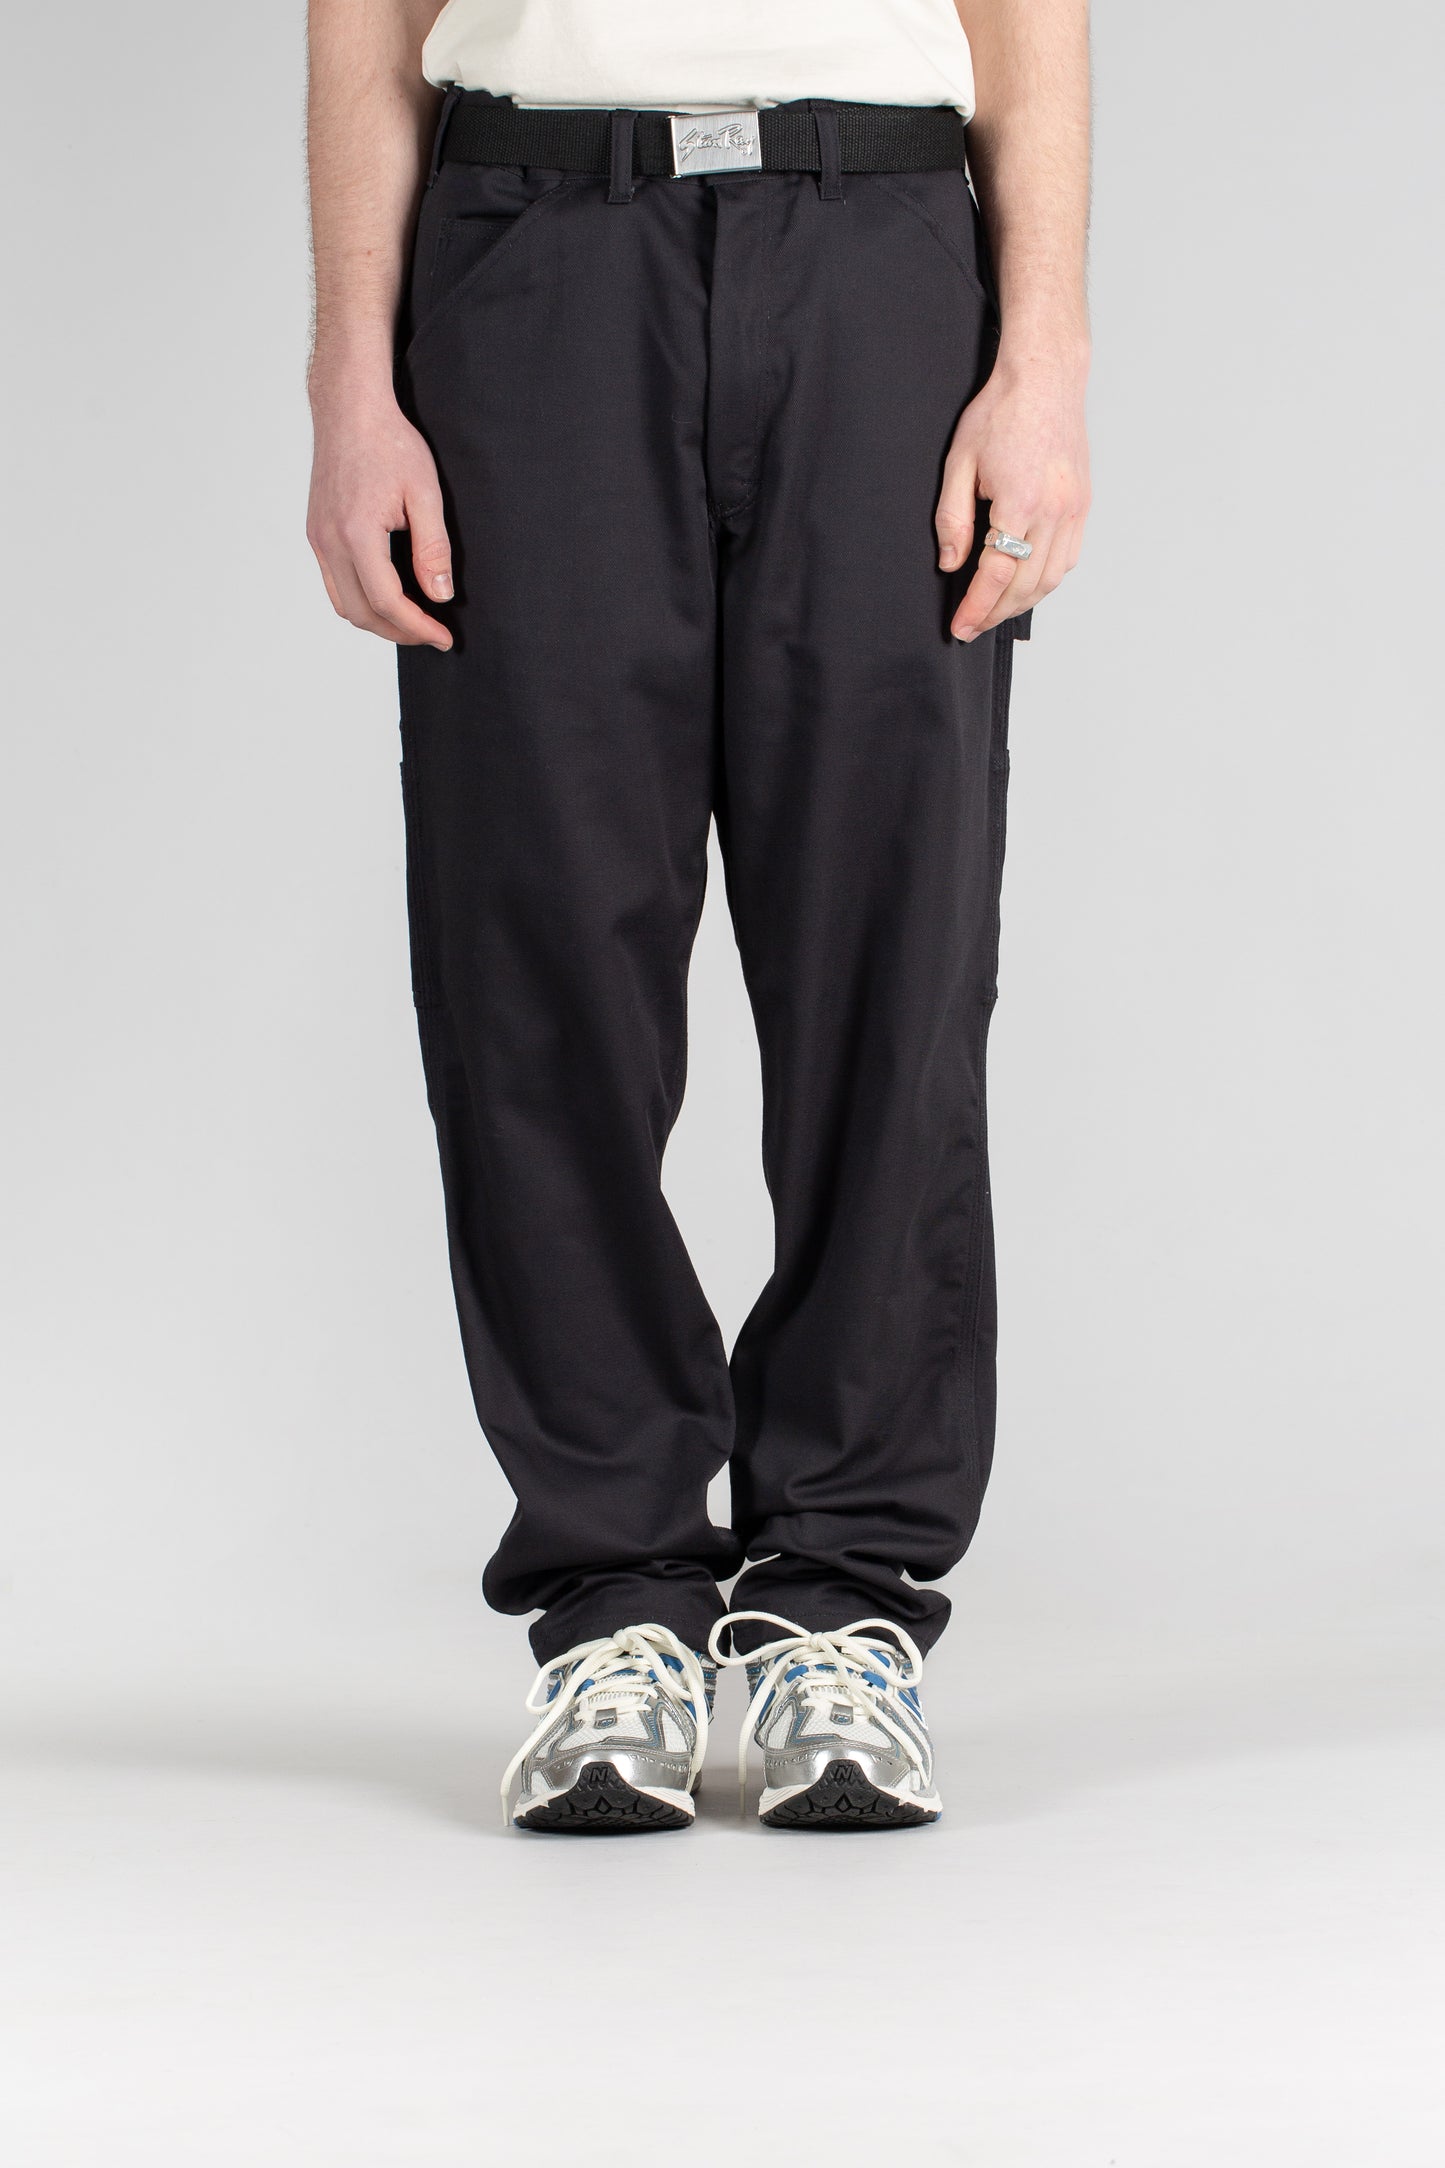 80s Painter Pant (Earl's Black Twill) - Stan Ray